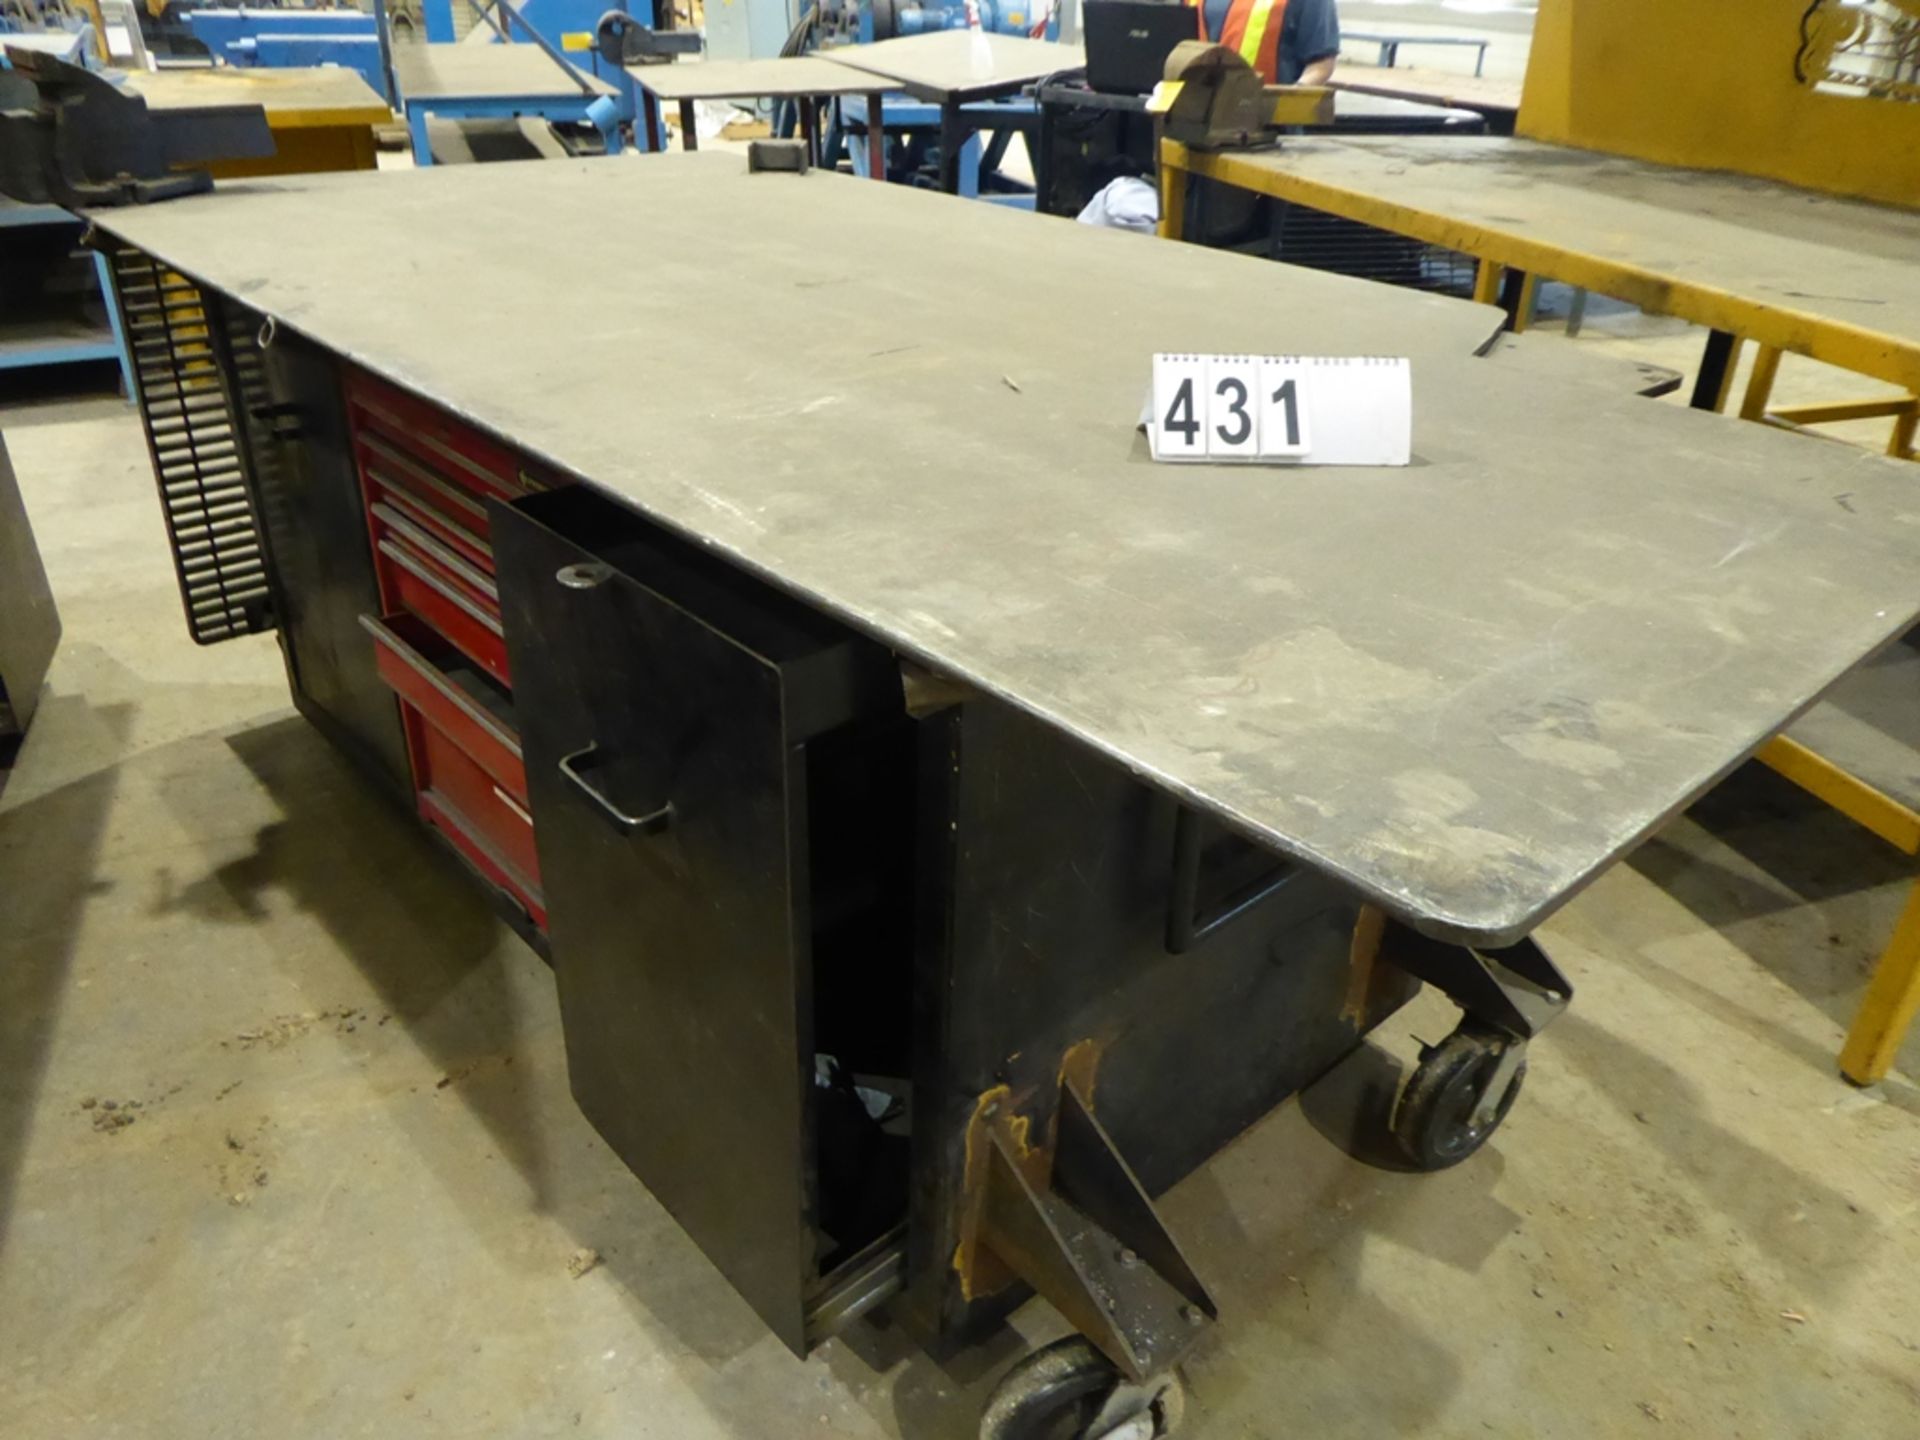 3'X7' STEEL WORK TABLE W/ CUTTING EXTENSIONS, TOOL BOXES, UNDER STORAGE, RECORD #6 VISE